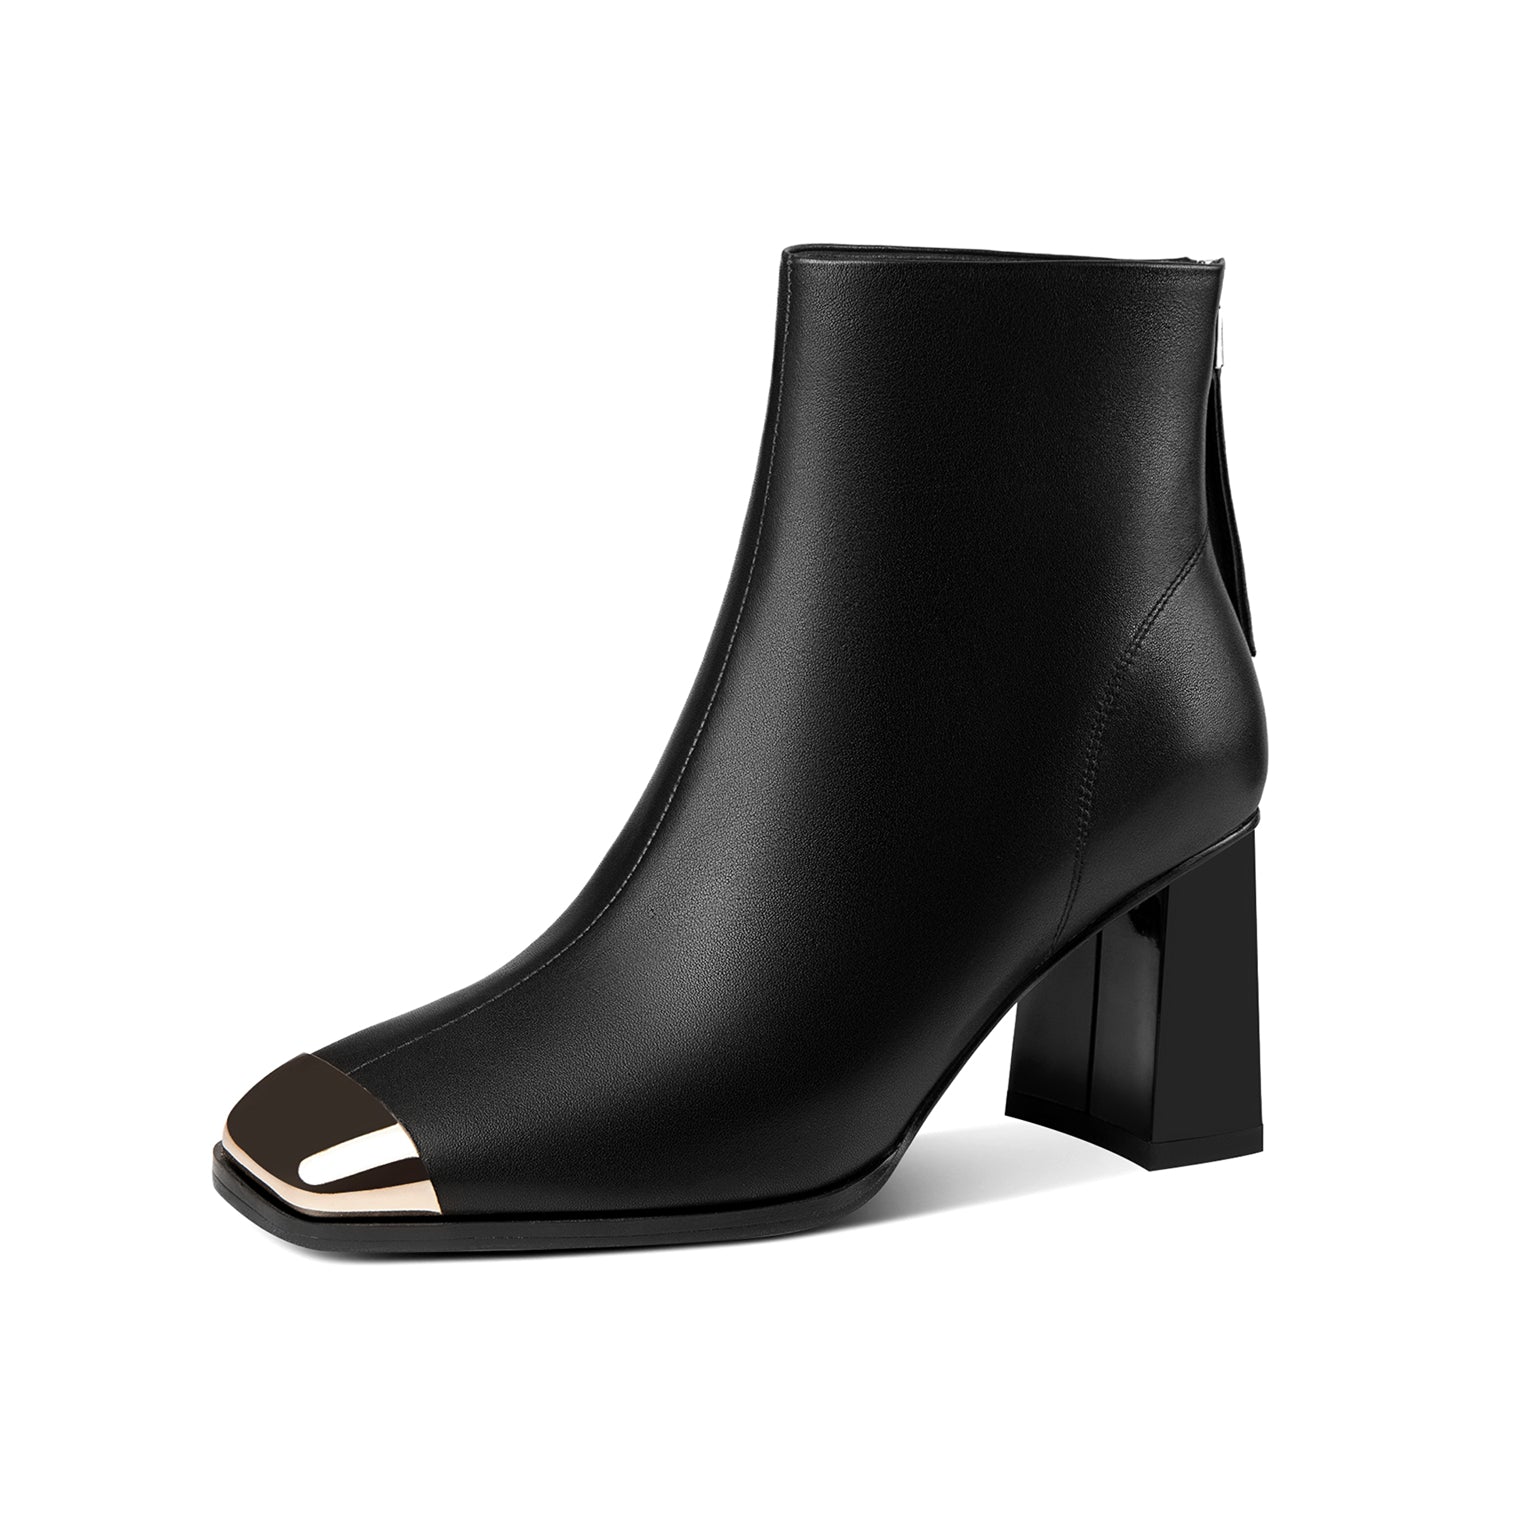 Women's Peep Toe Chunky Heeled Ankle Boots, Cut-out Back Zipper